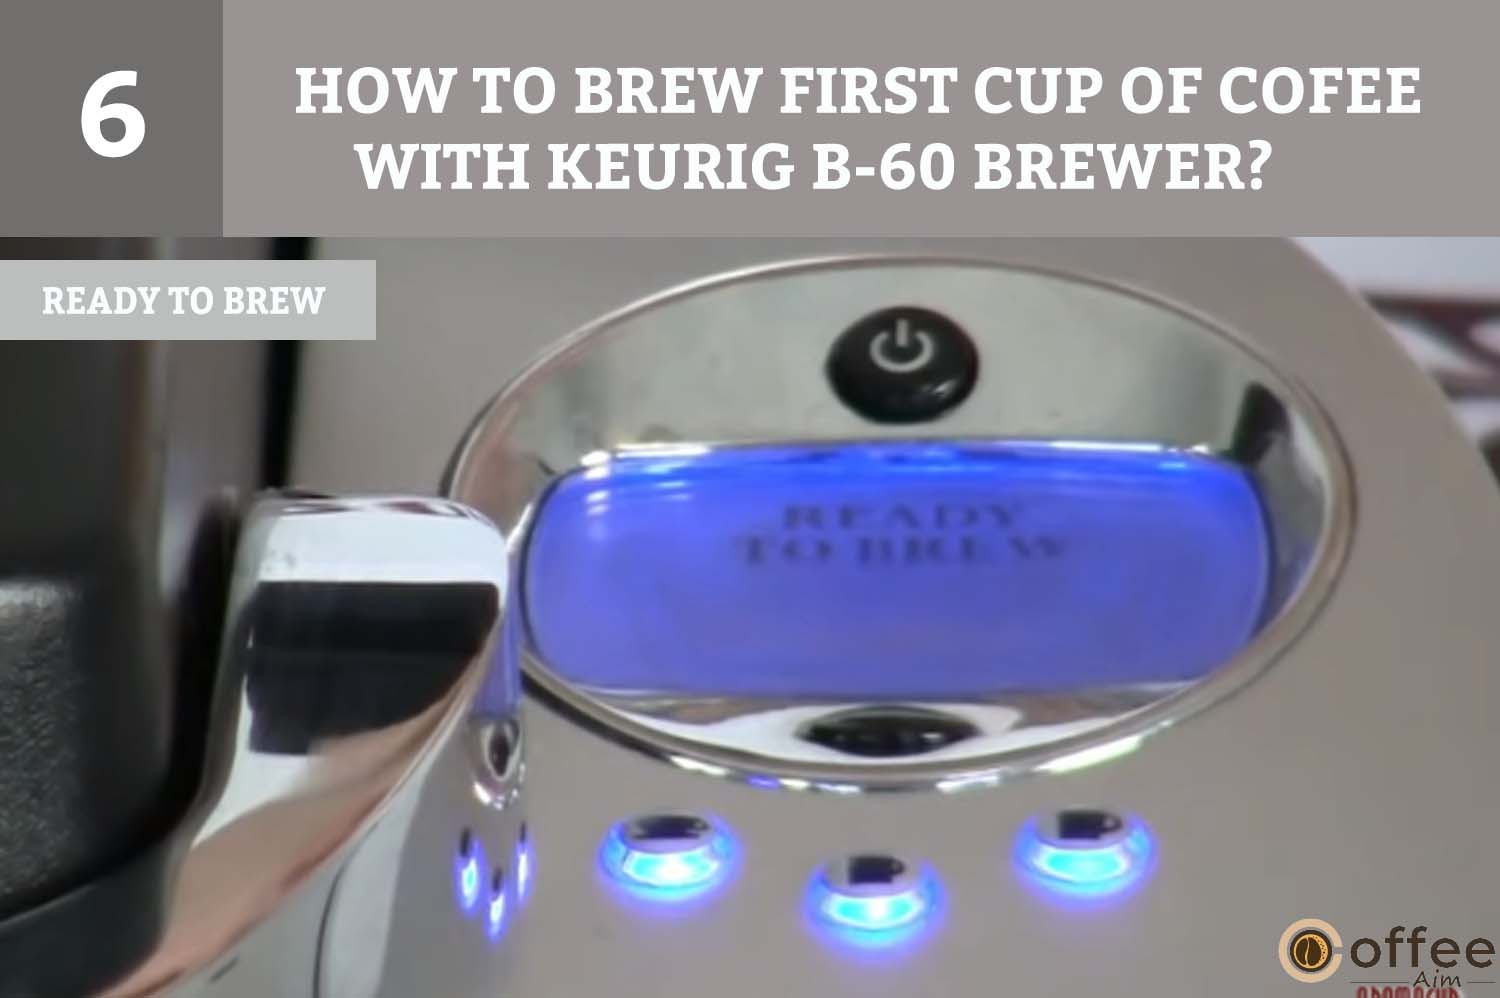 Lower the handle to close the lid over the K-Cup holder. The LCD Control Center will display "READY TO BREW," and the brew size buttons will blink briefly for up to 60 seconds.